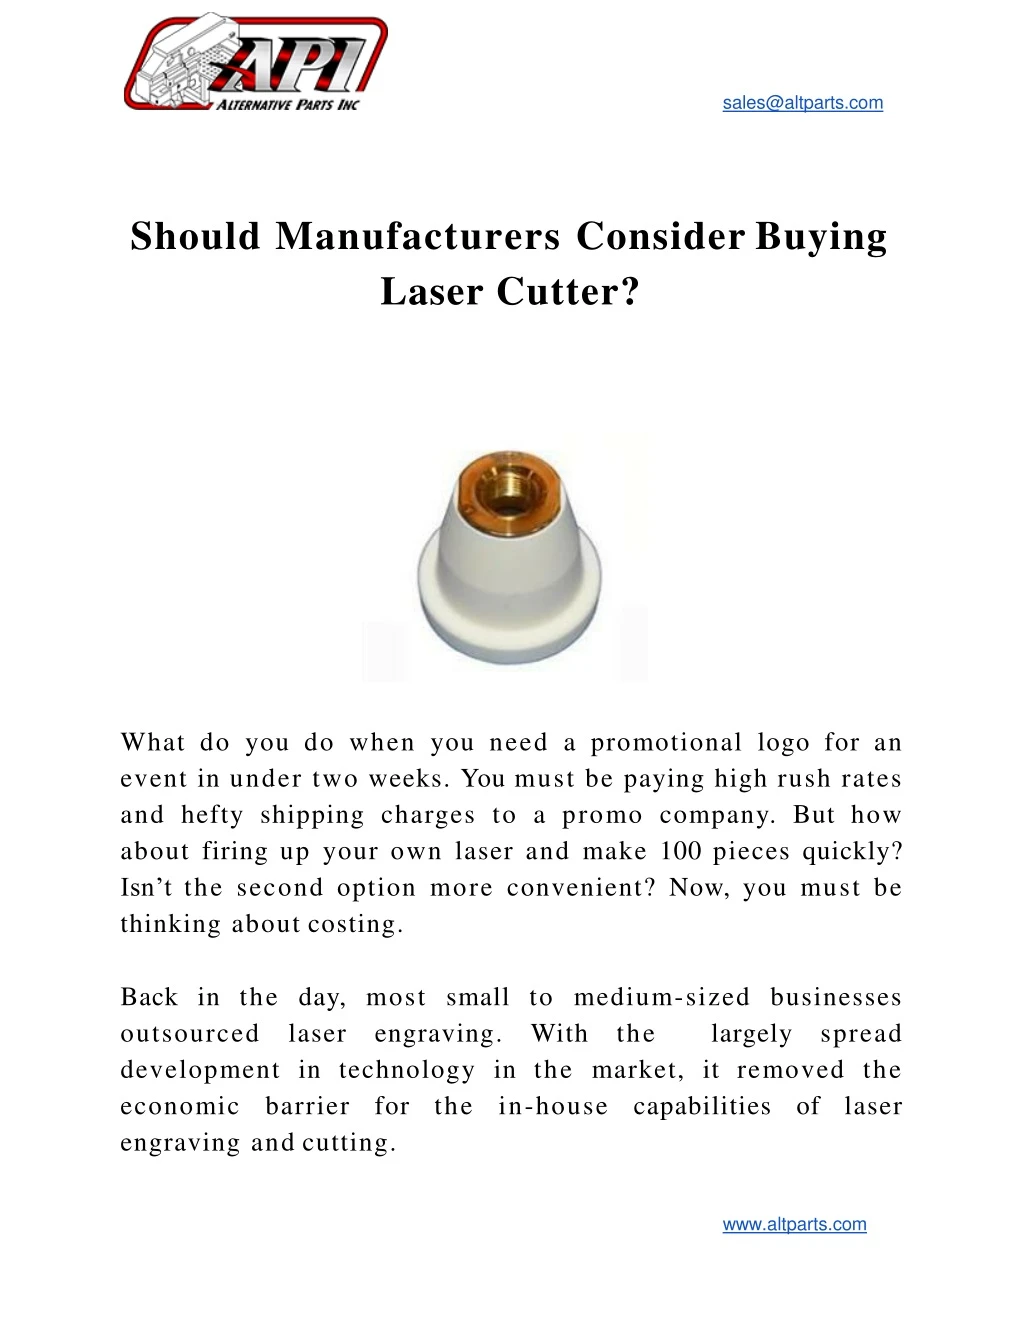 should manufacturers consider buying laser cutter